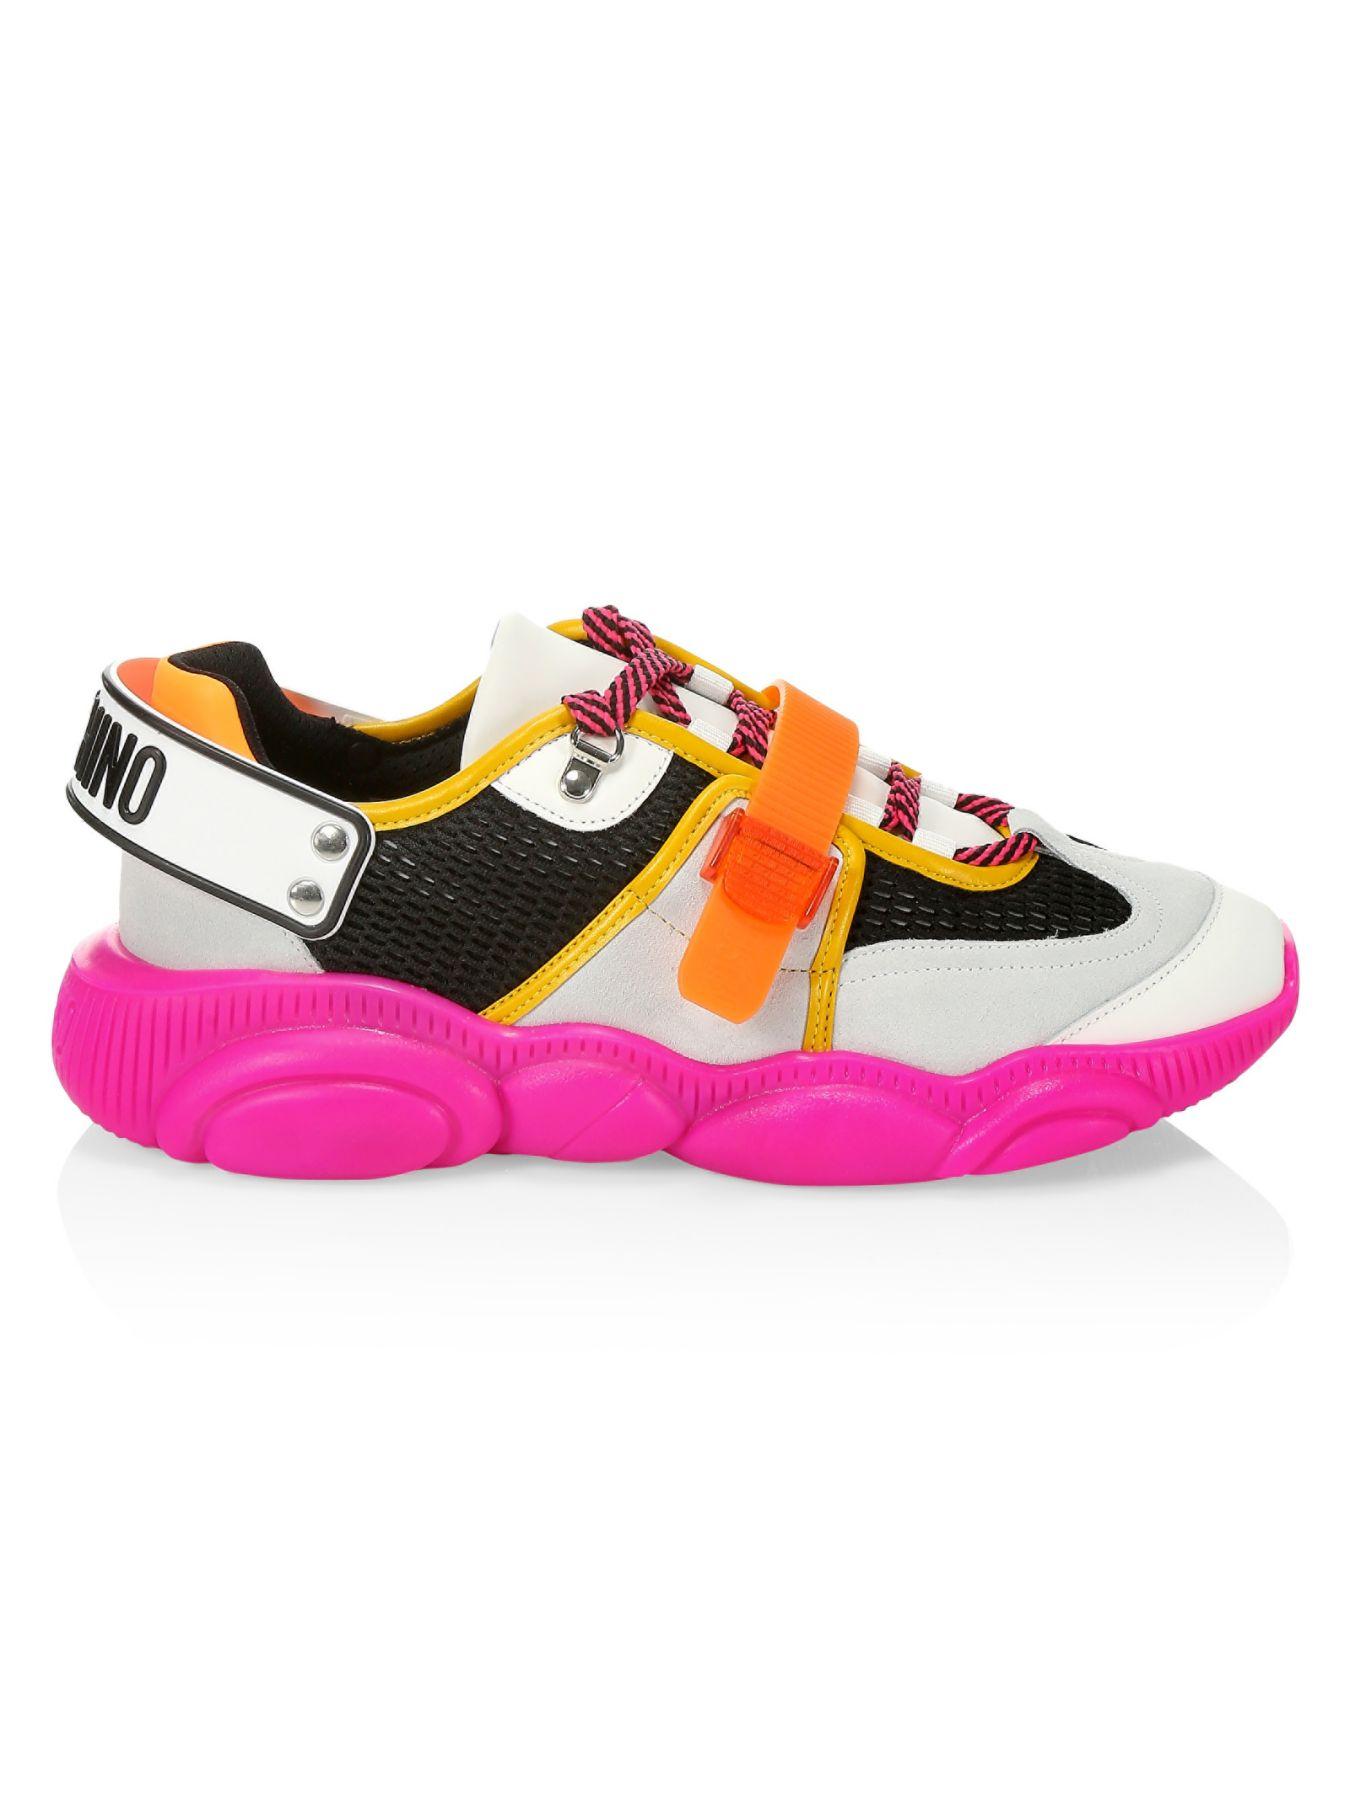 Moschino Synthetic Fuxia Teddy Sneakers for Men - Lyst